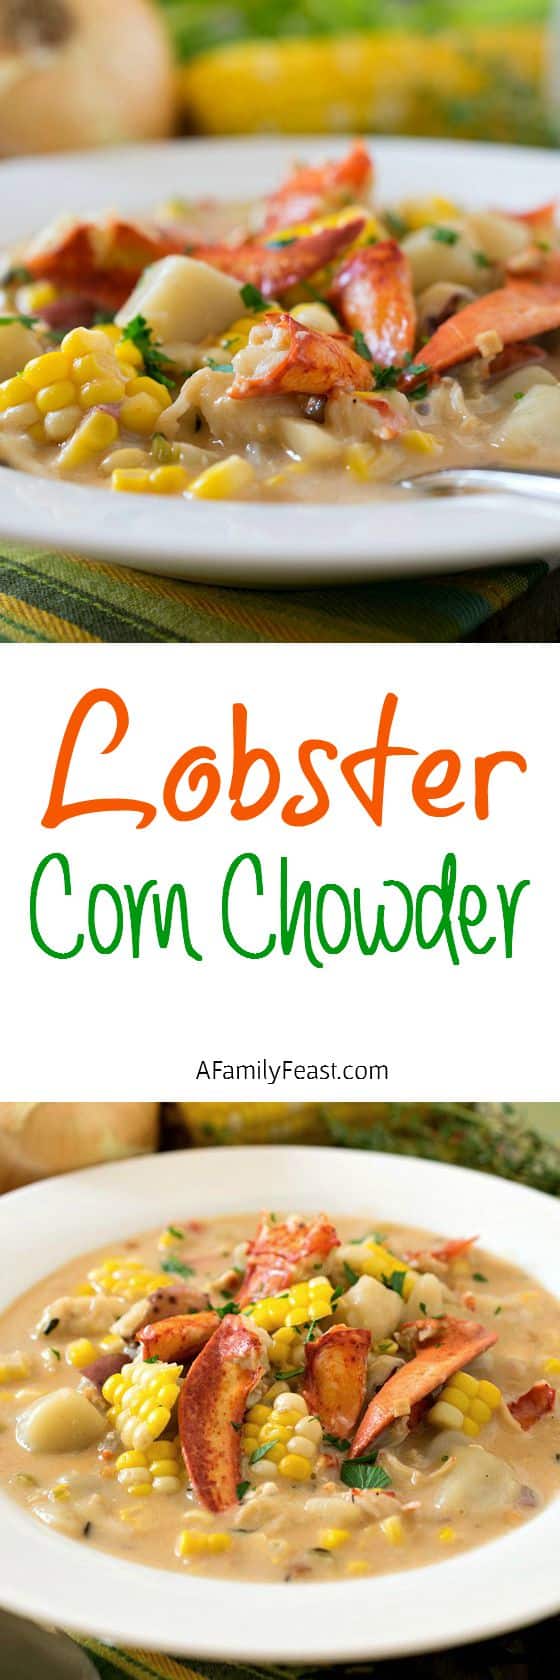 Lobster Corn Chowder - The tastes of summer at the beach in a bowl! A light and creamy super flavorful broth loaded with chunks of lobster, corn and potatoes.